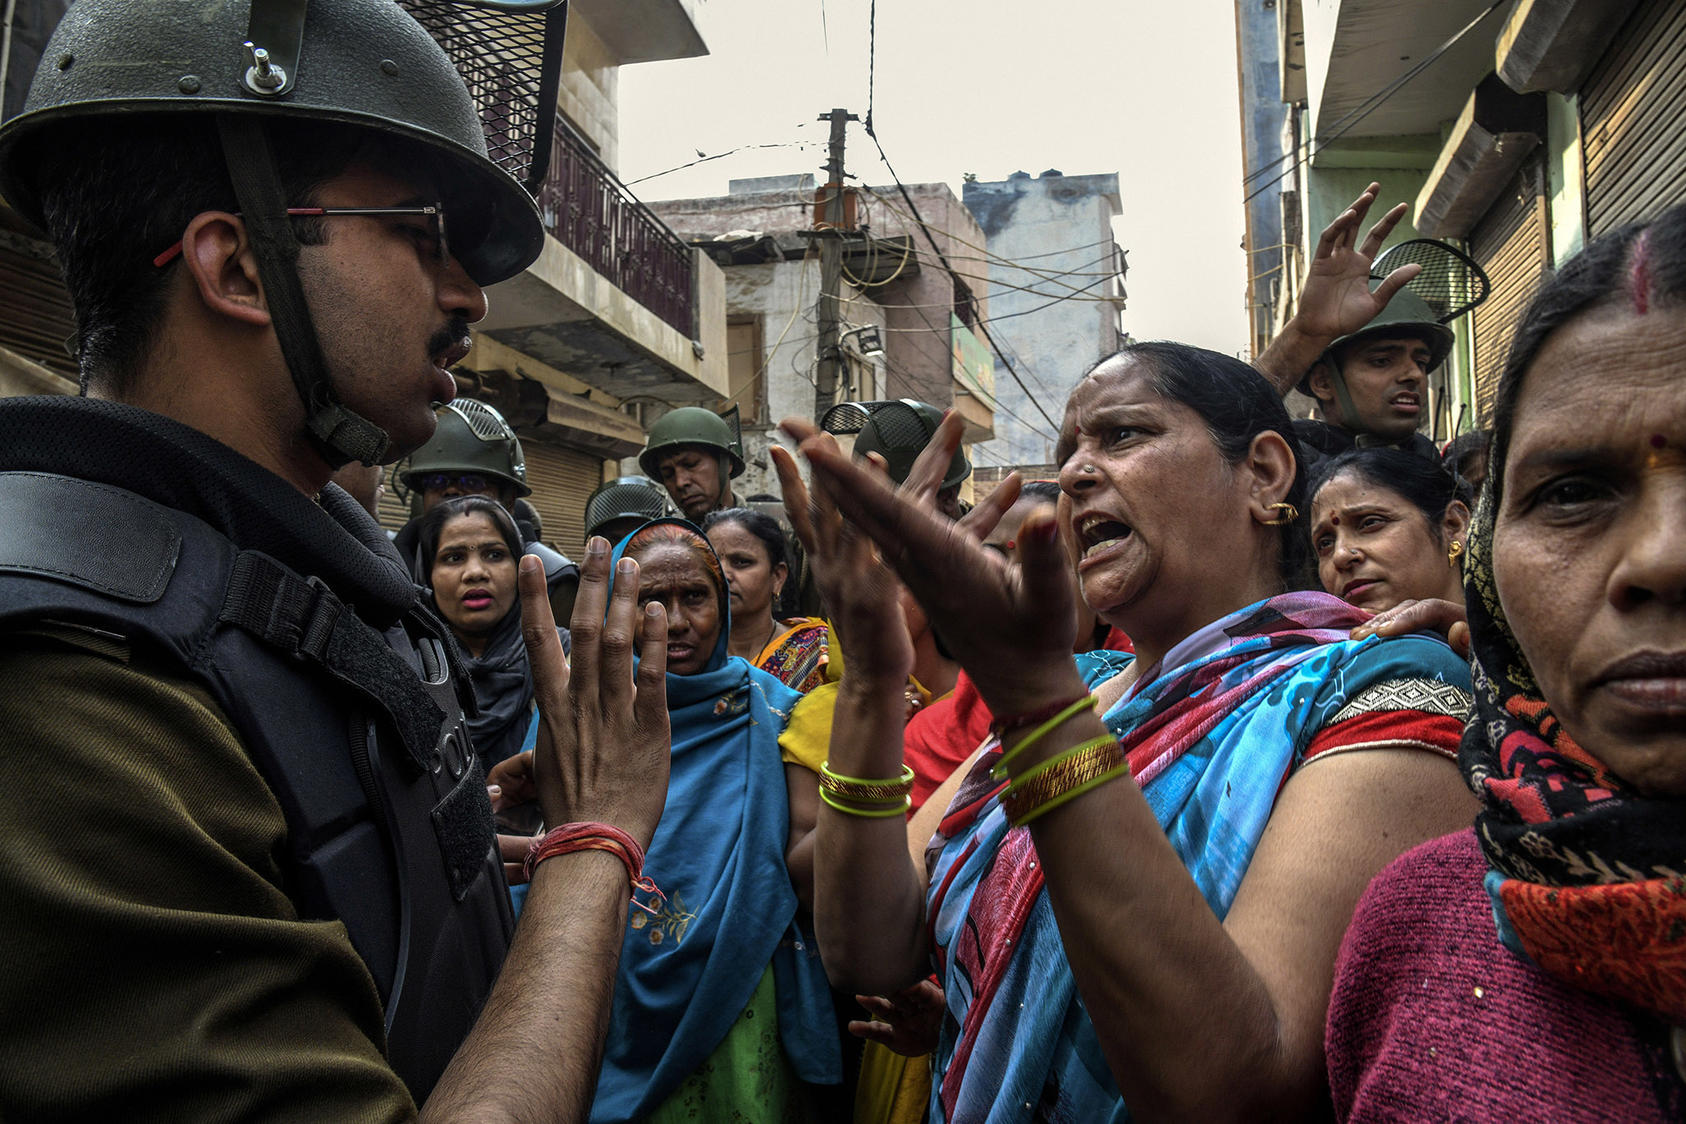 / Residents argue with security personnel in the Shiv Vihar neighborhood of Delhi on Friday, Feb. 28, 2020. The New Delhi police force has been widely criticized for standing by during some of the worst religious violence in years. (Atul Loke/The New York Times)